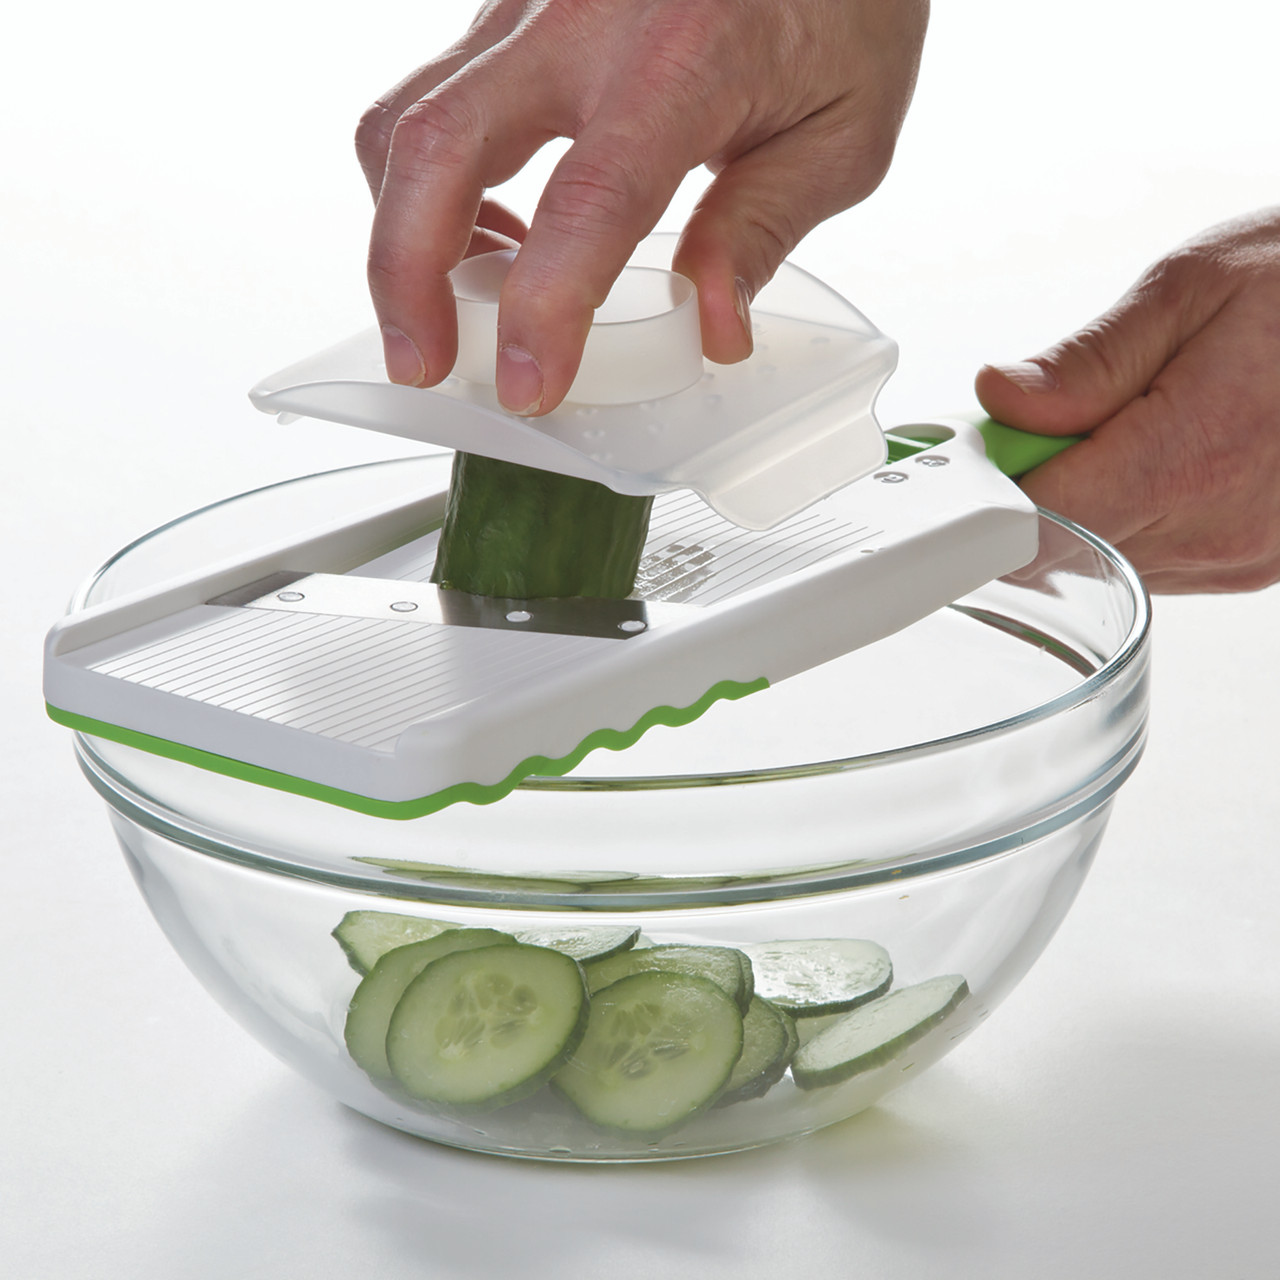 This Mandoline Makes Slicing Vegetables 'Fast and Easy'—and It's Over 50%  Off at